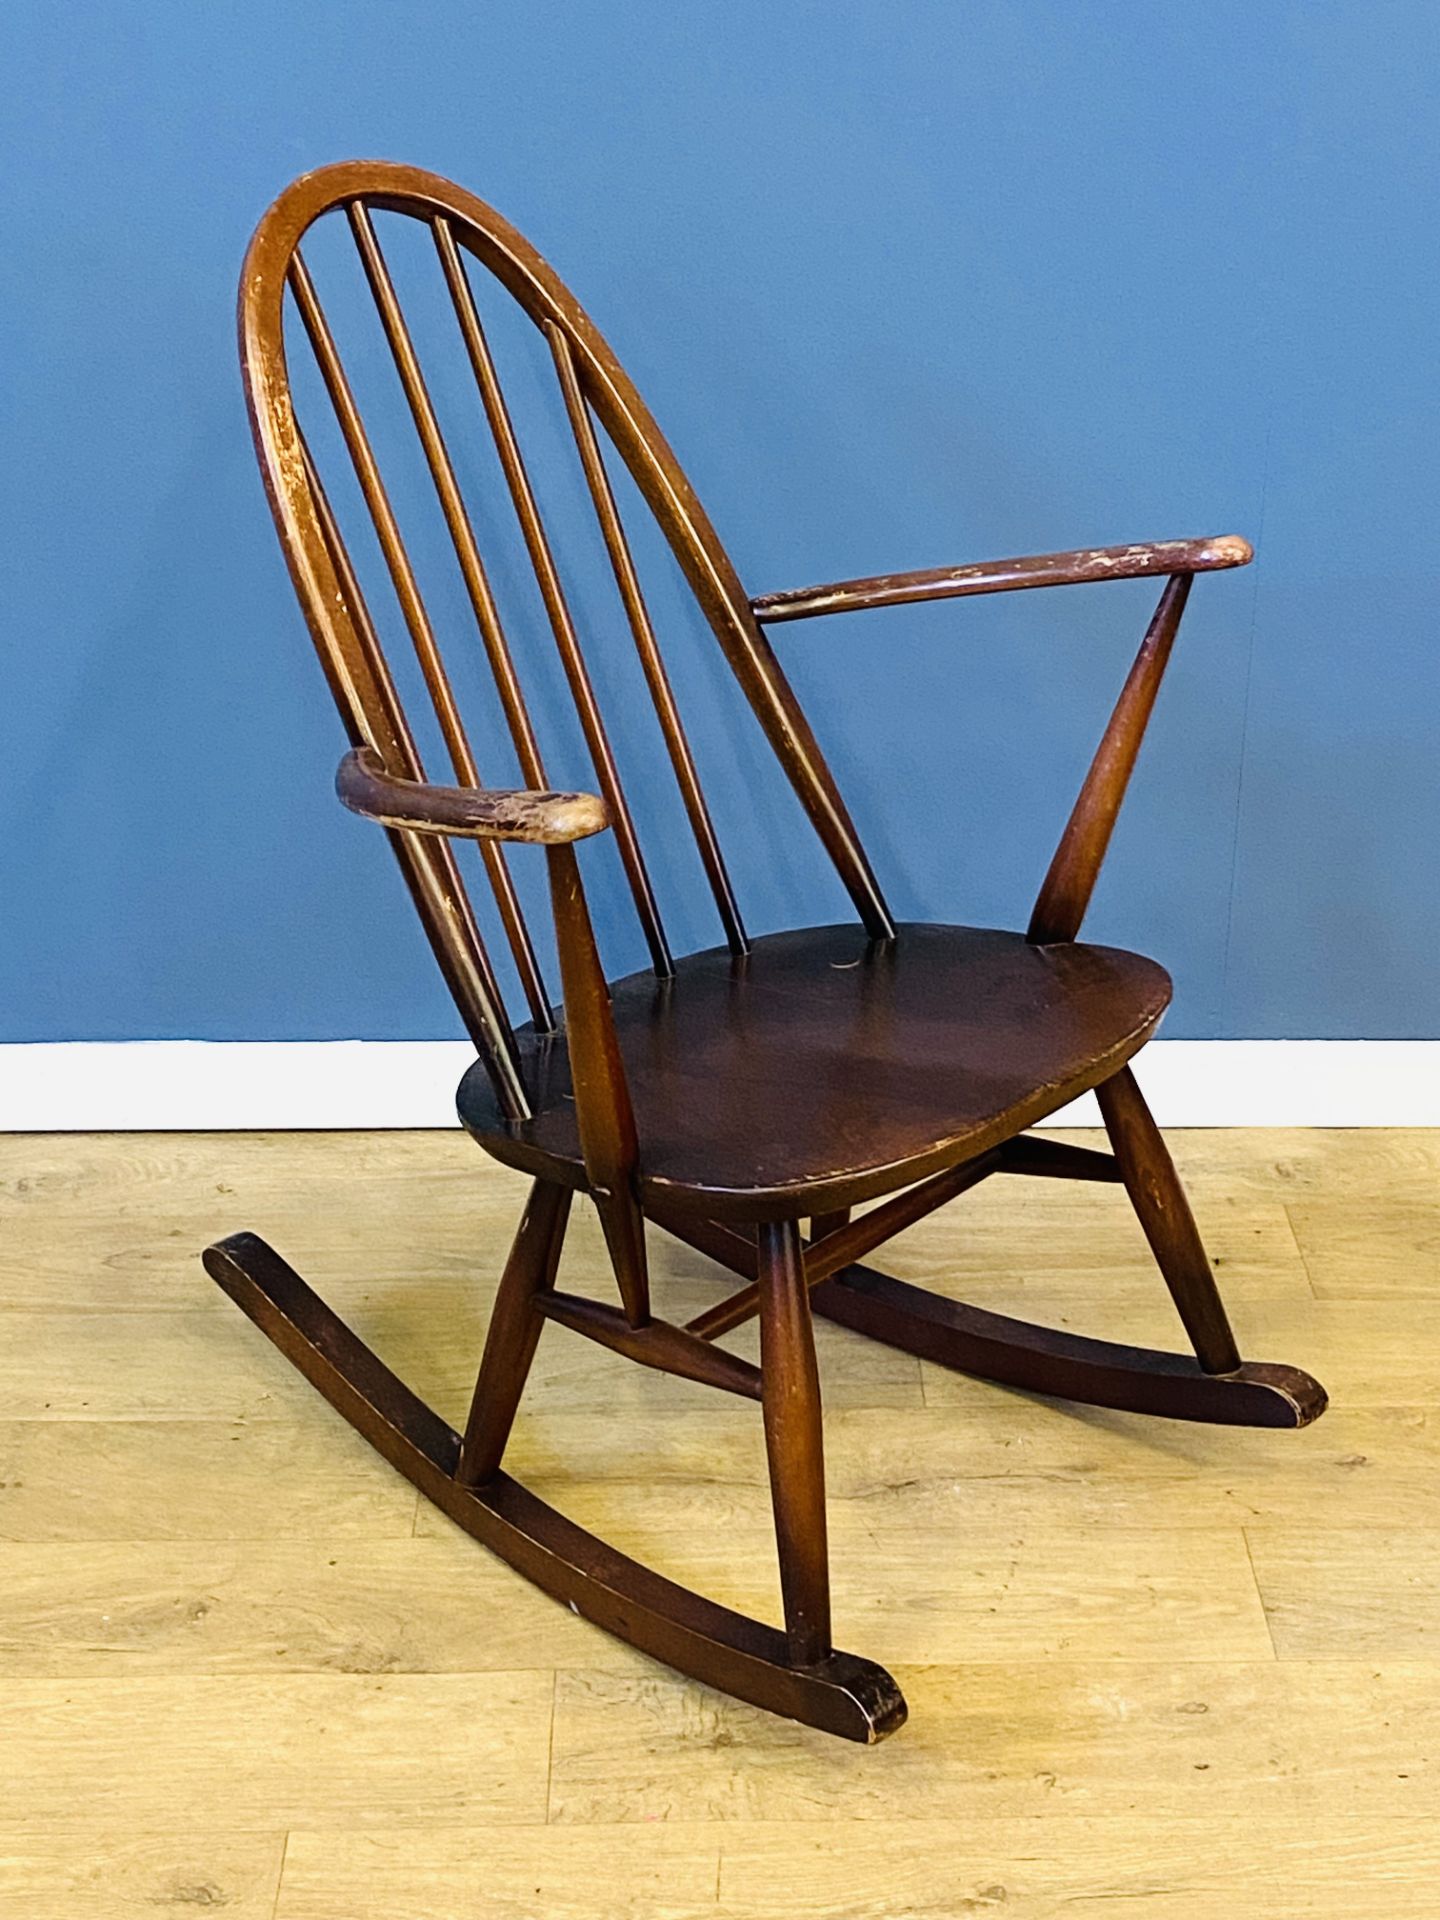 Ercol style childs rocking chair - Image 2 of 4